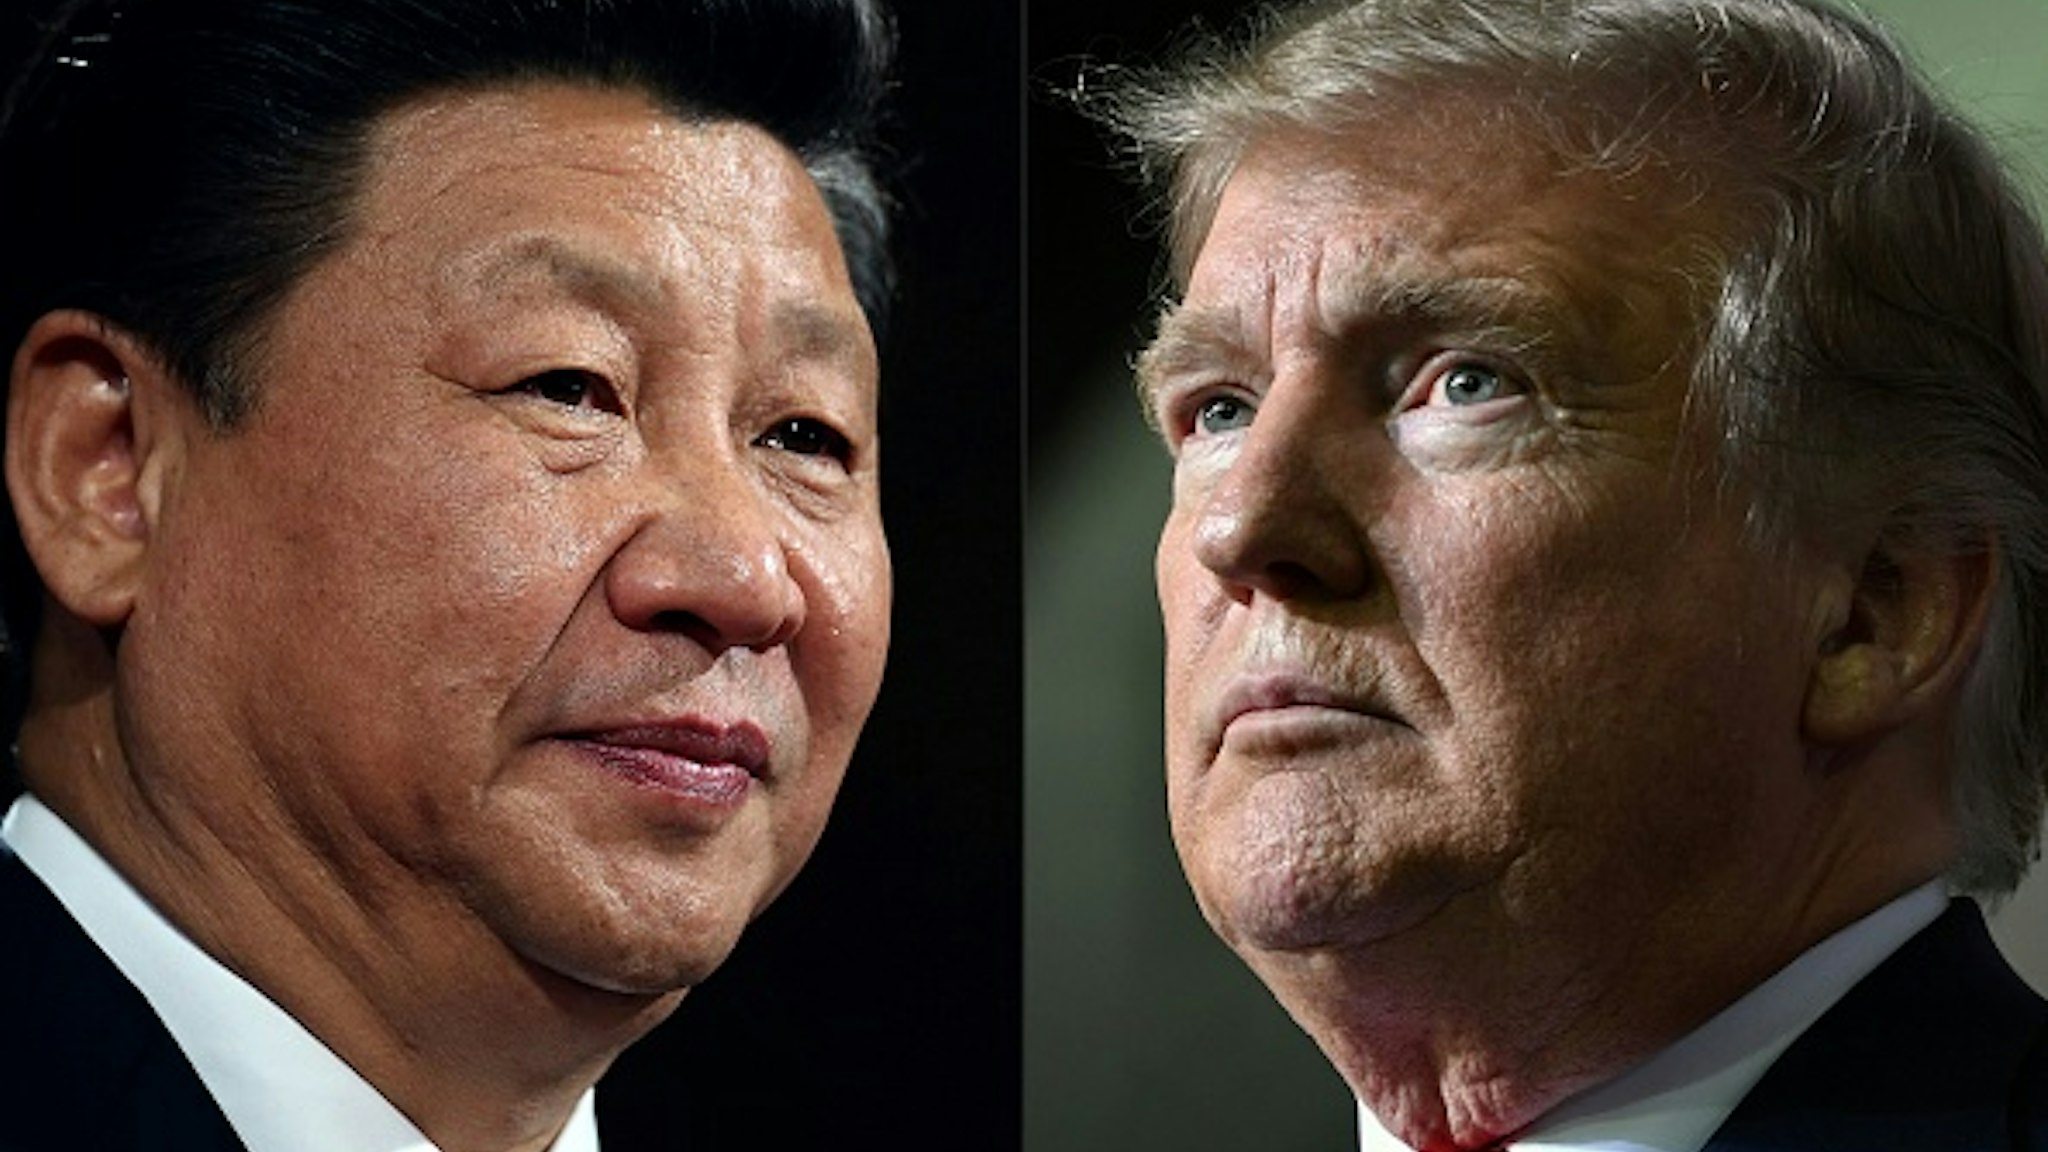 (COMBO) This combination of pictures created on May 14, 2020 shows recent portraits of China's President Xi Jinping (L) and US President Donald Trump. - US President Donald Trump said on May 14, 2020, he is no mood to speak with China's Xi Jinping, warning darkly he might cut off ties with the rival superpower over its handling of the coronavirus pandemic. "I have a very good relationship, but I just -- right now I don't want to speak to him," Trump told Fox Business.